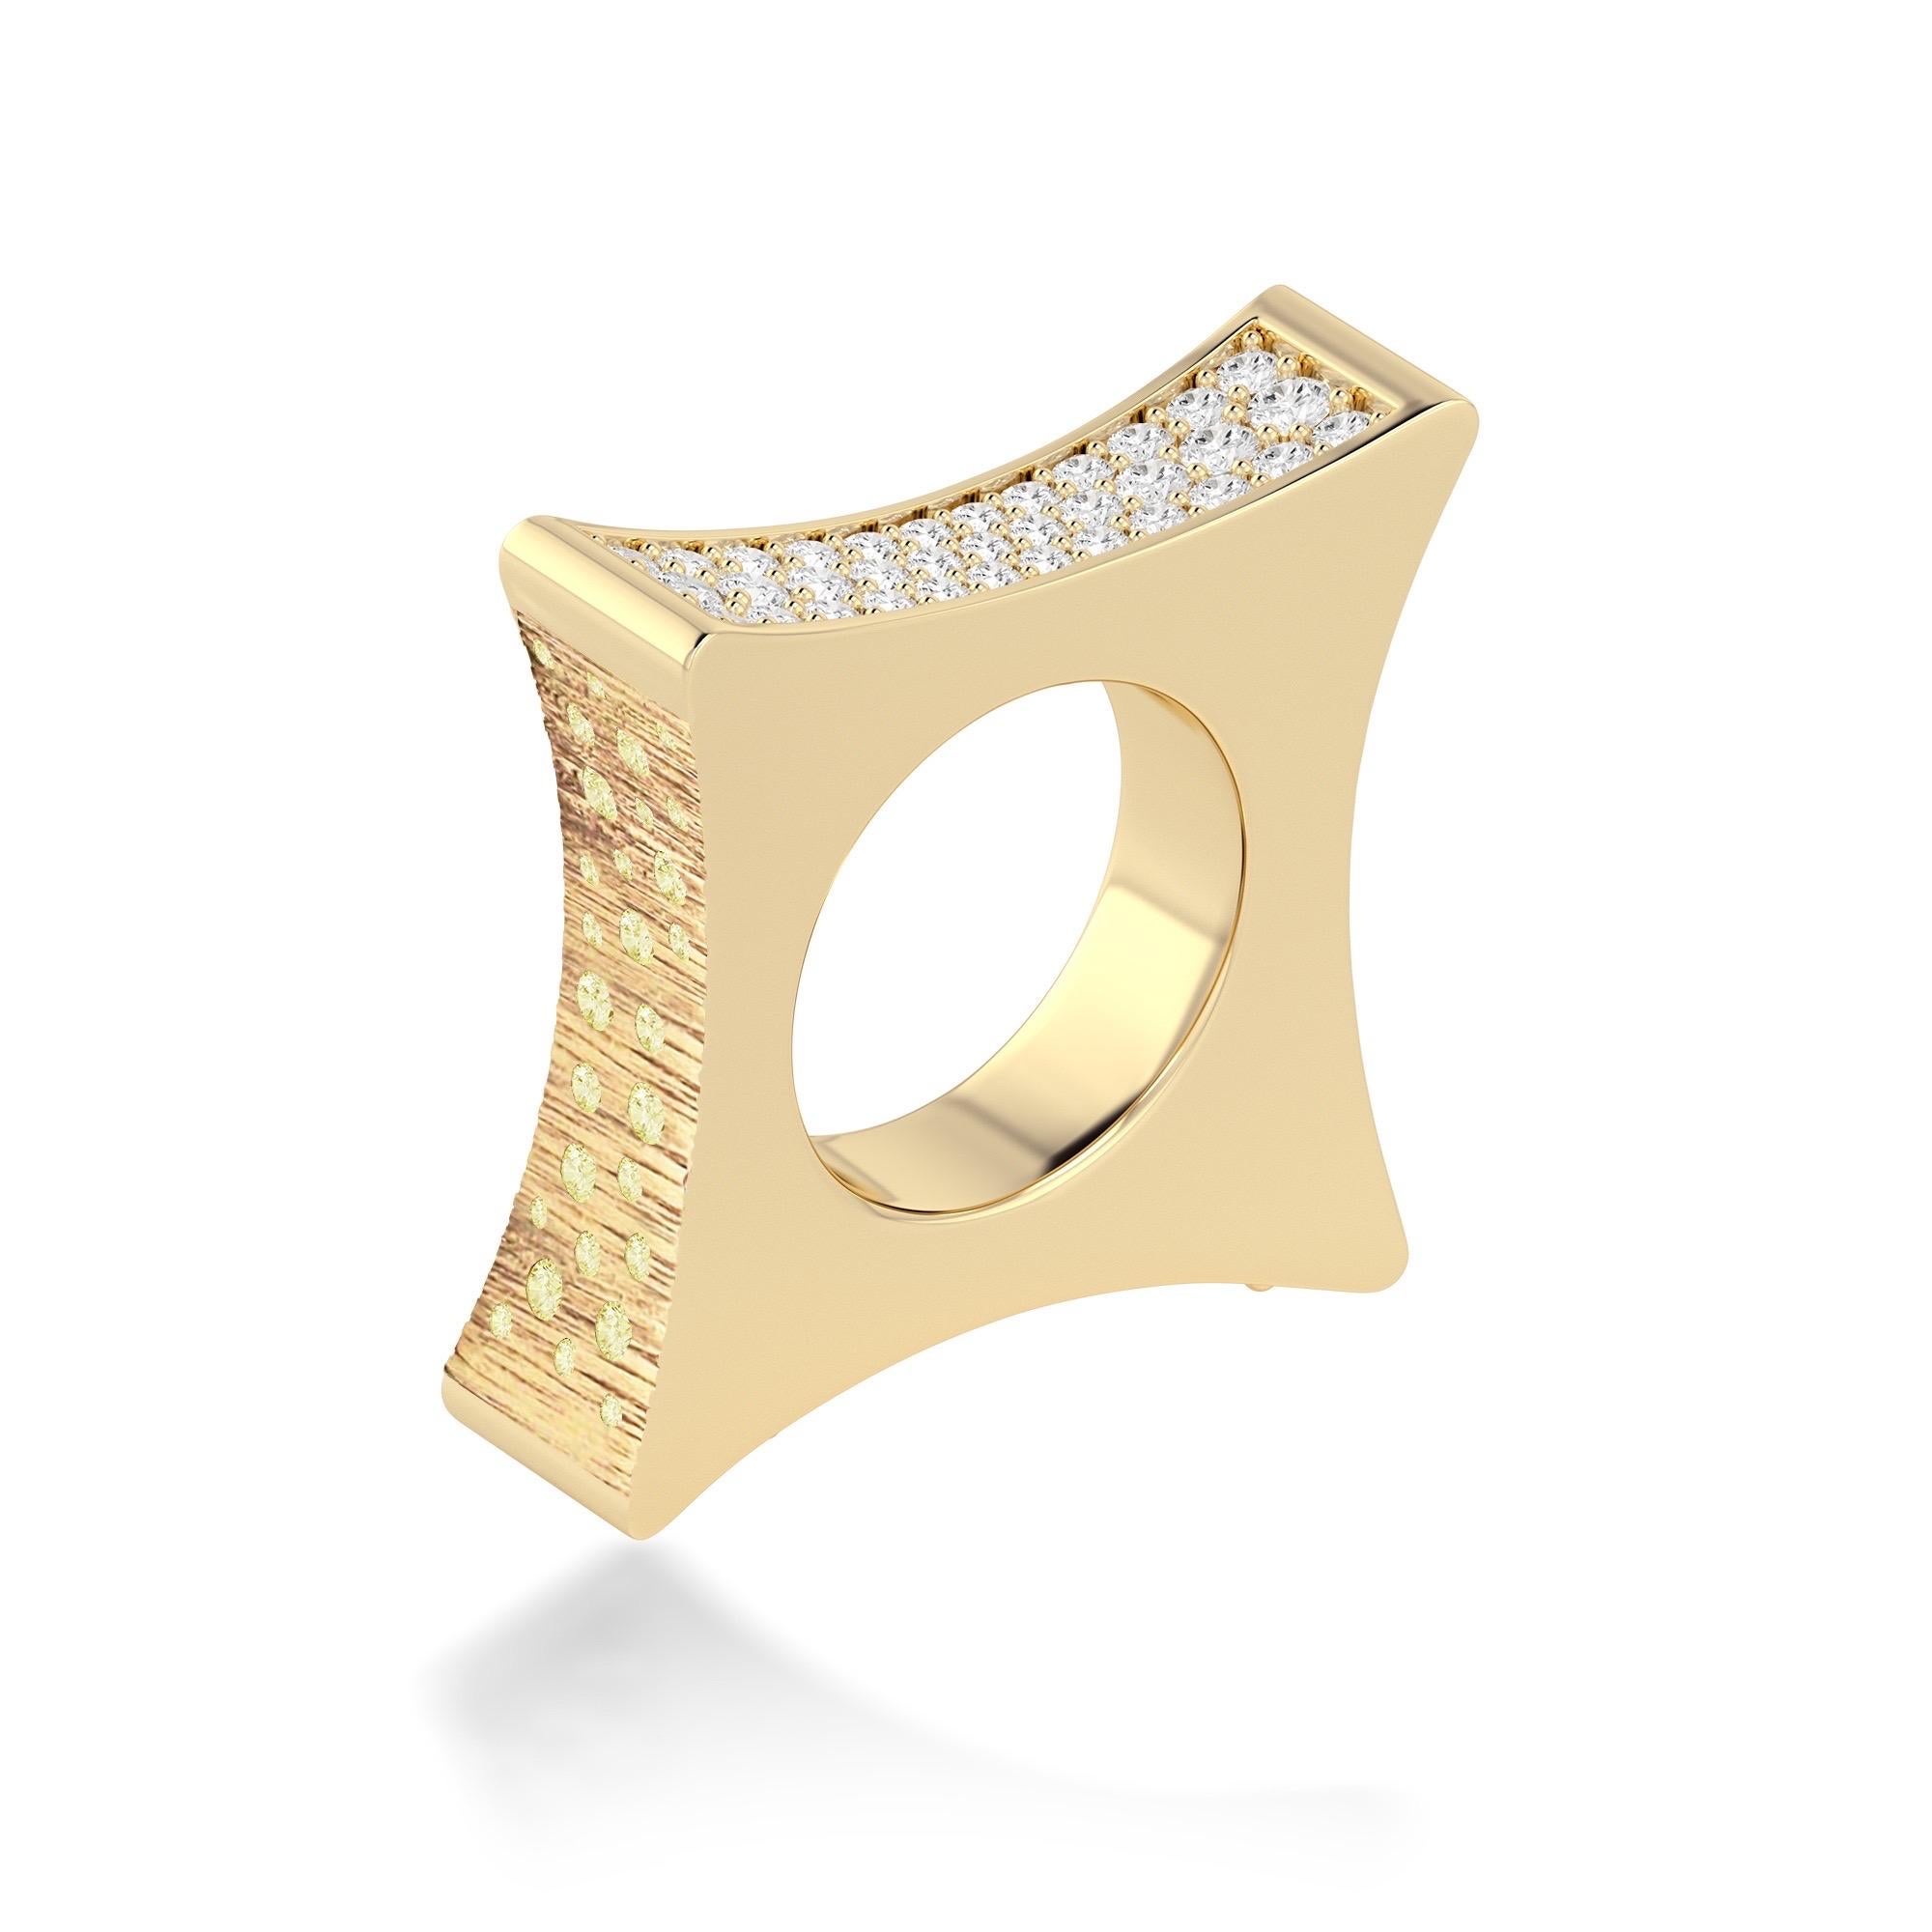 Ruben Manuel Designs “Autumn” Ring. 18K YG four sided ring. Set w/VS white and color diamonds (yellow, orange, champagne, brown).  Side one: VS white pave.  Side two:  Yellow diamonds set in distinctive “bark”texture.  Side 3:  Champagne, light